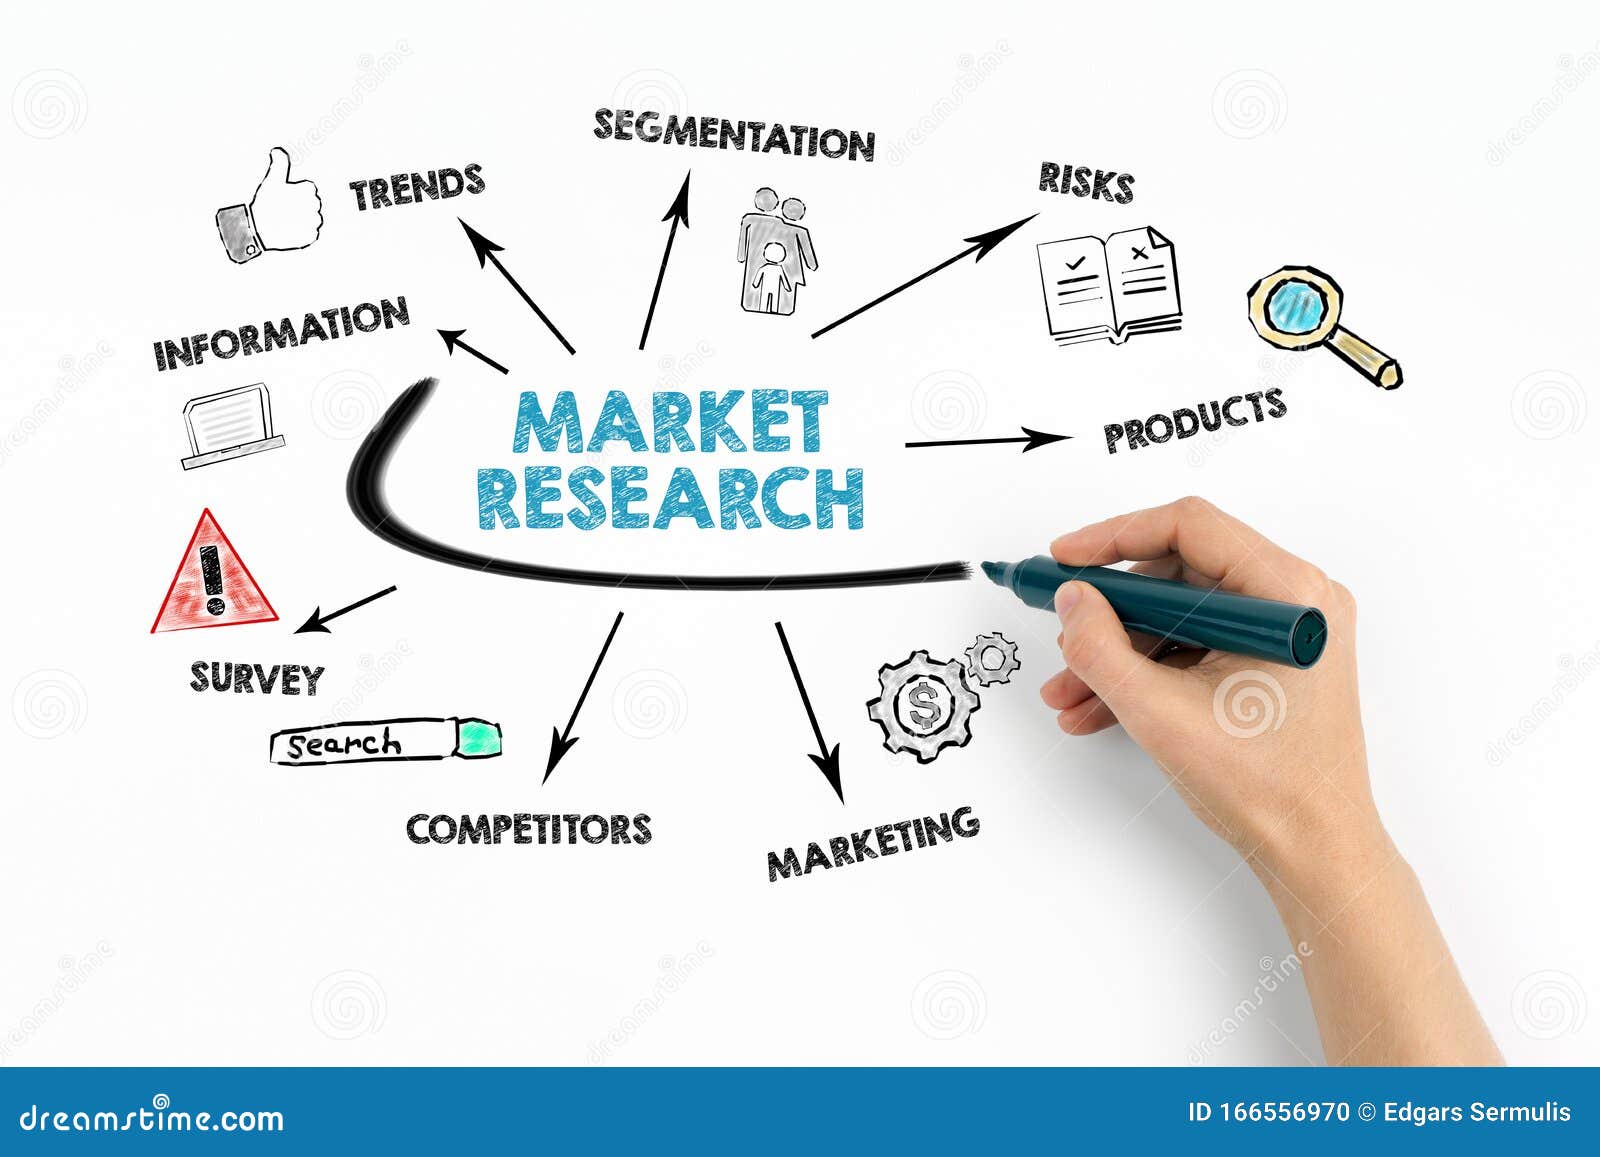 market research industry trends